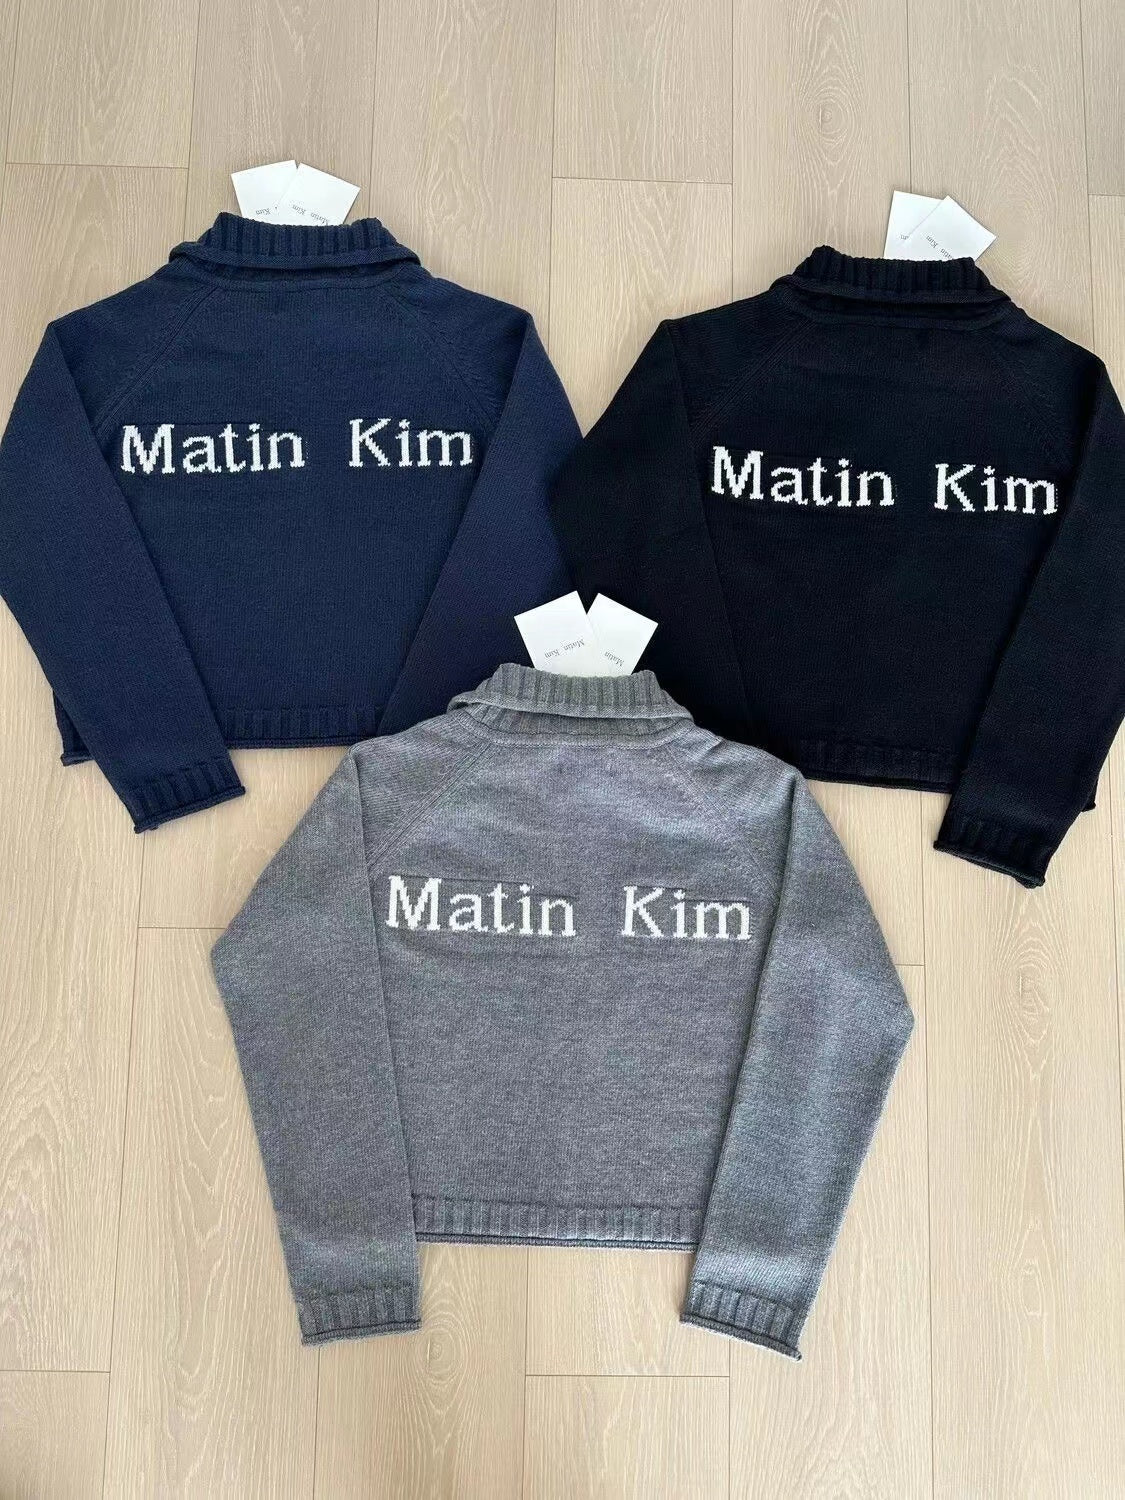 Autumn and Winter New Korean Fashion Batshirt Knitted Sweater Loose Korean Lazy Sweater knit Top